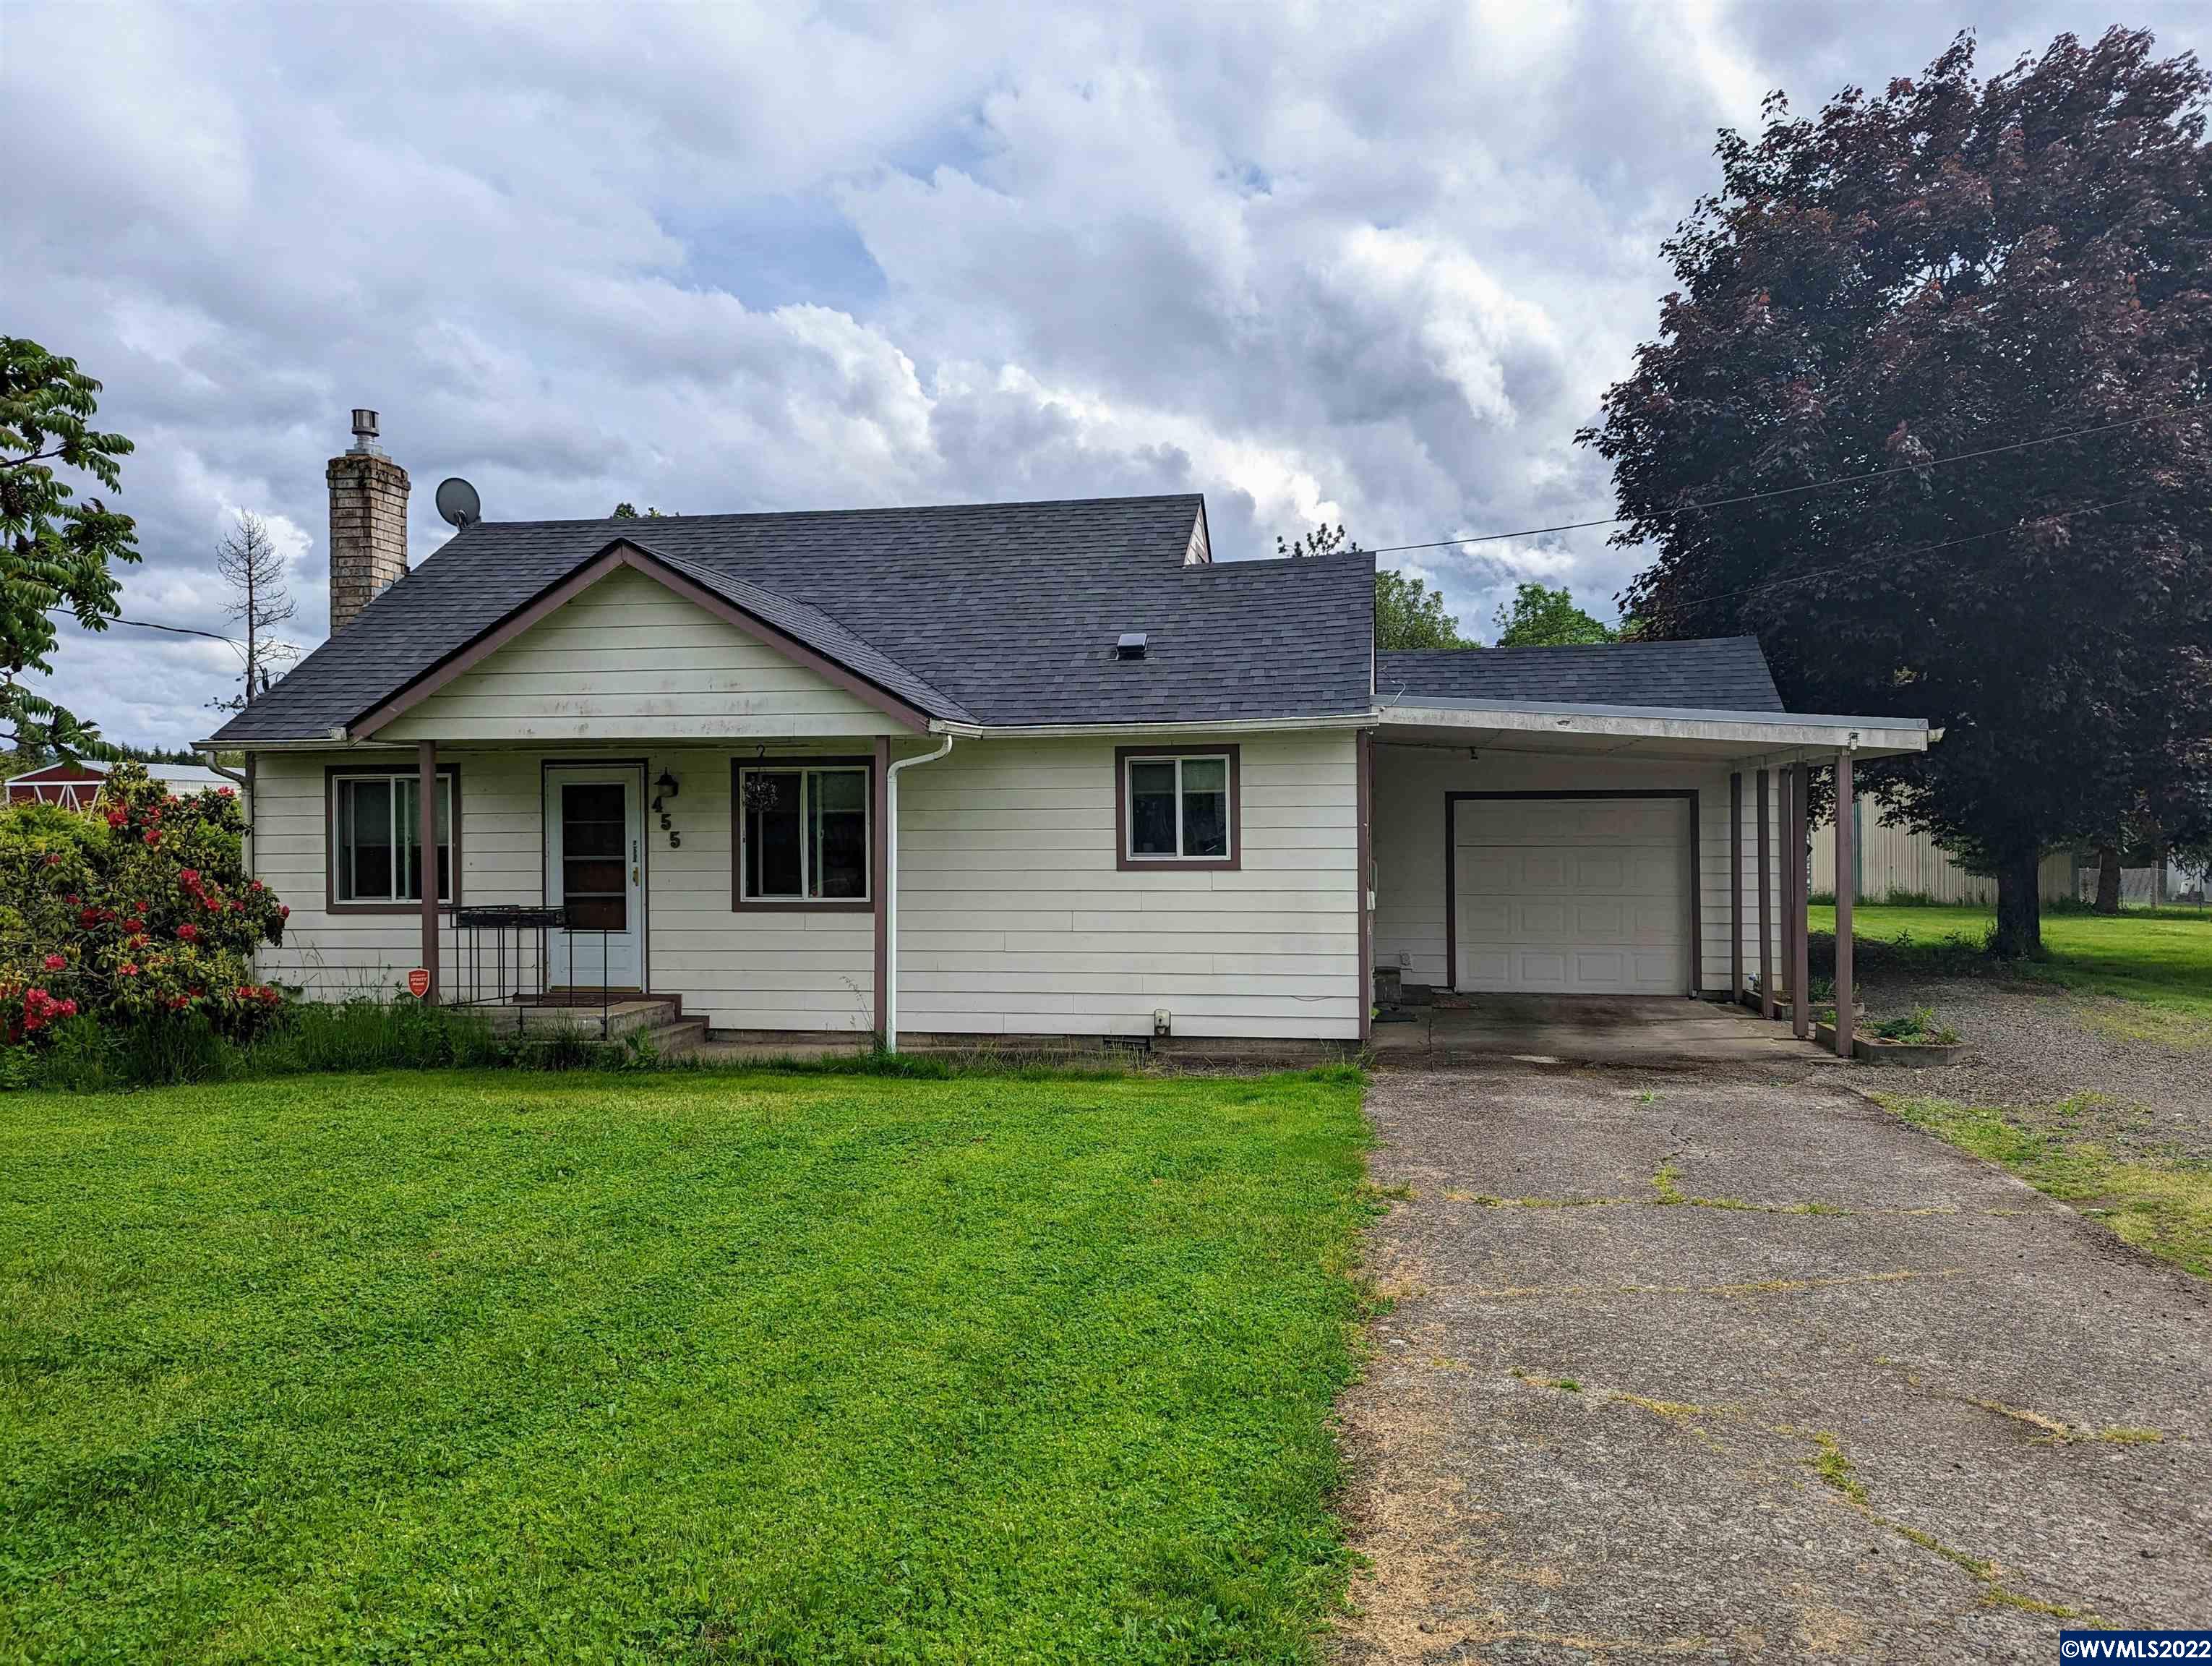 Looking for more than a tiny backyard? This home has all the yard you could need, plus a shop! Great space for gardening, pets, kids, or whatever else you could need. New roof in 2021. Dont miss out on this one!